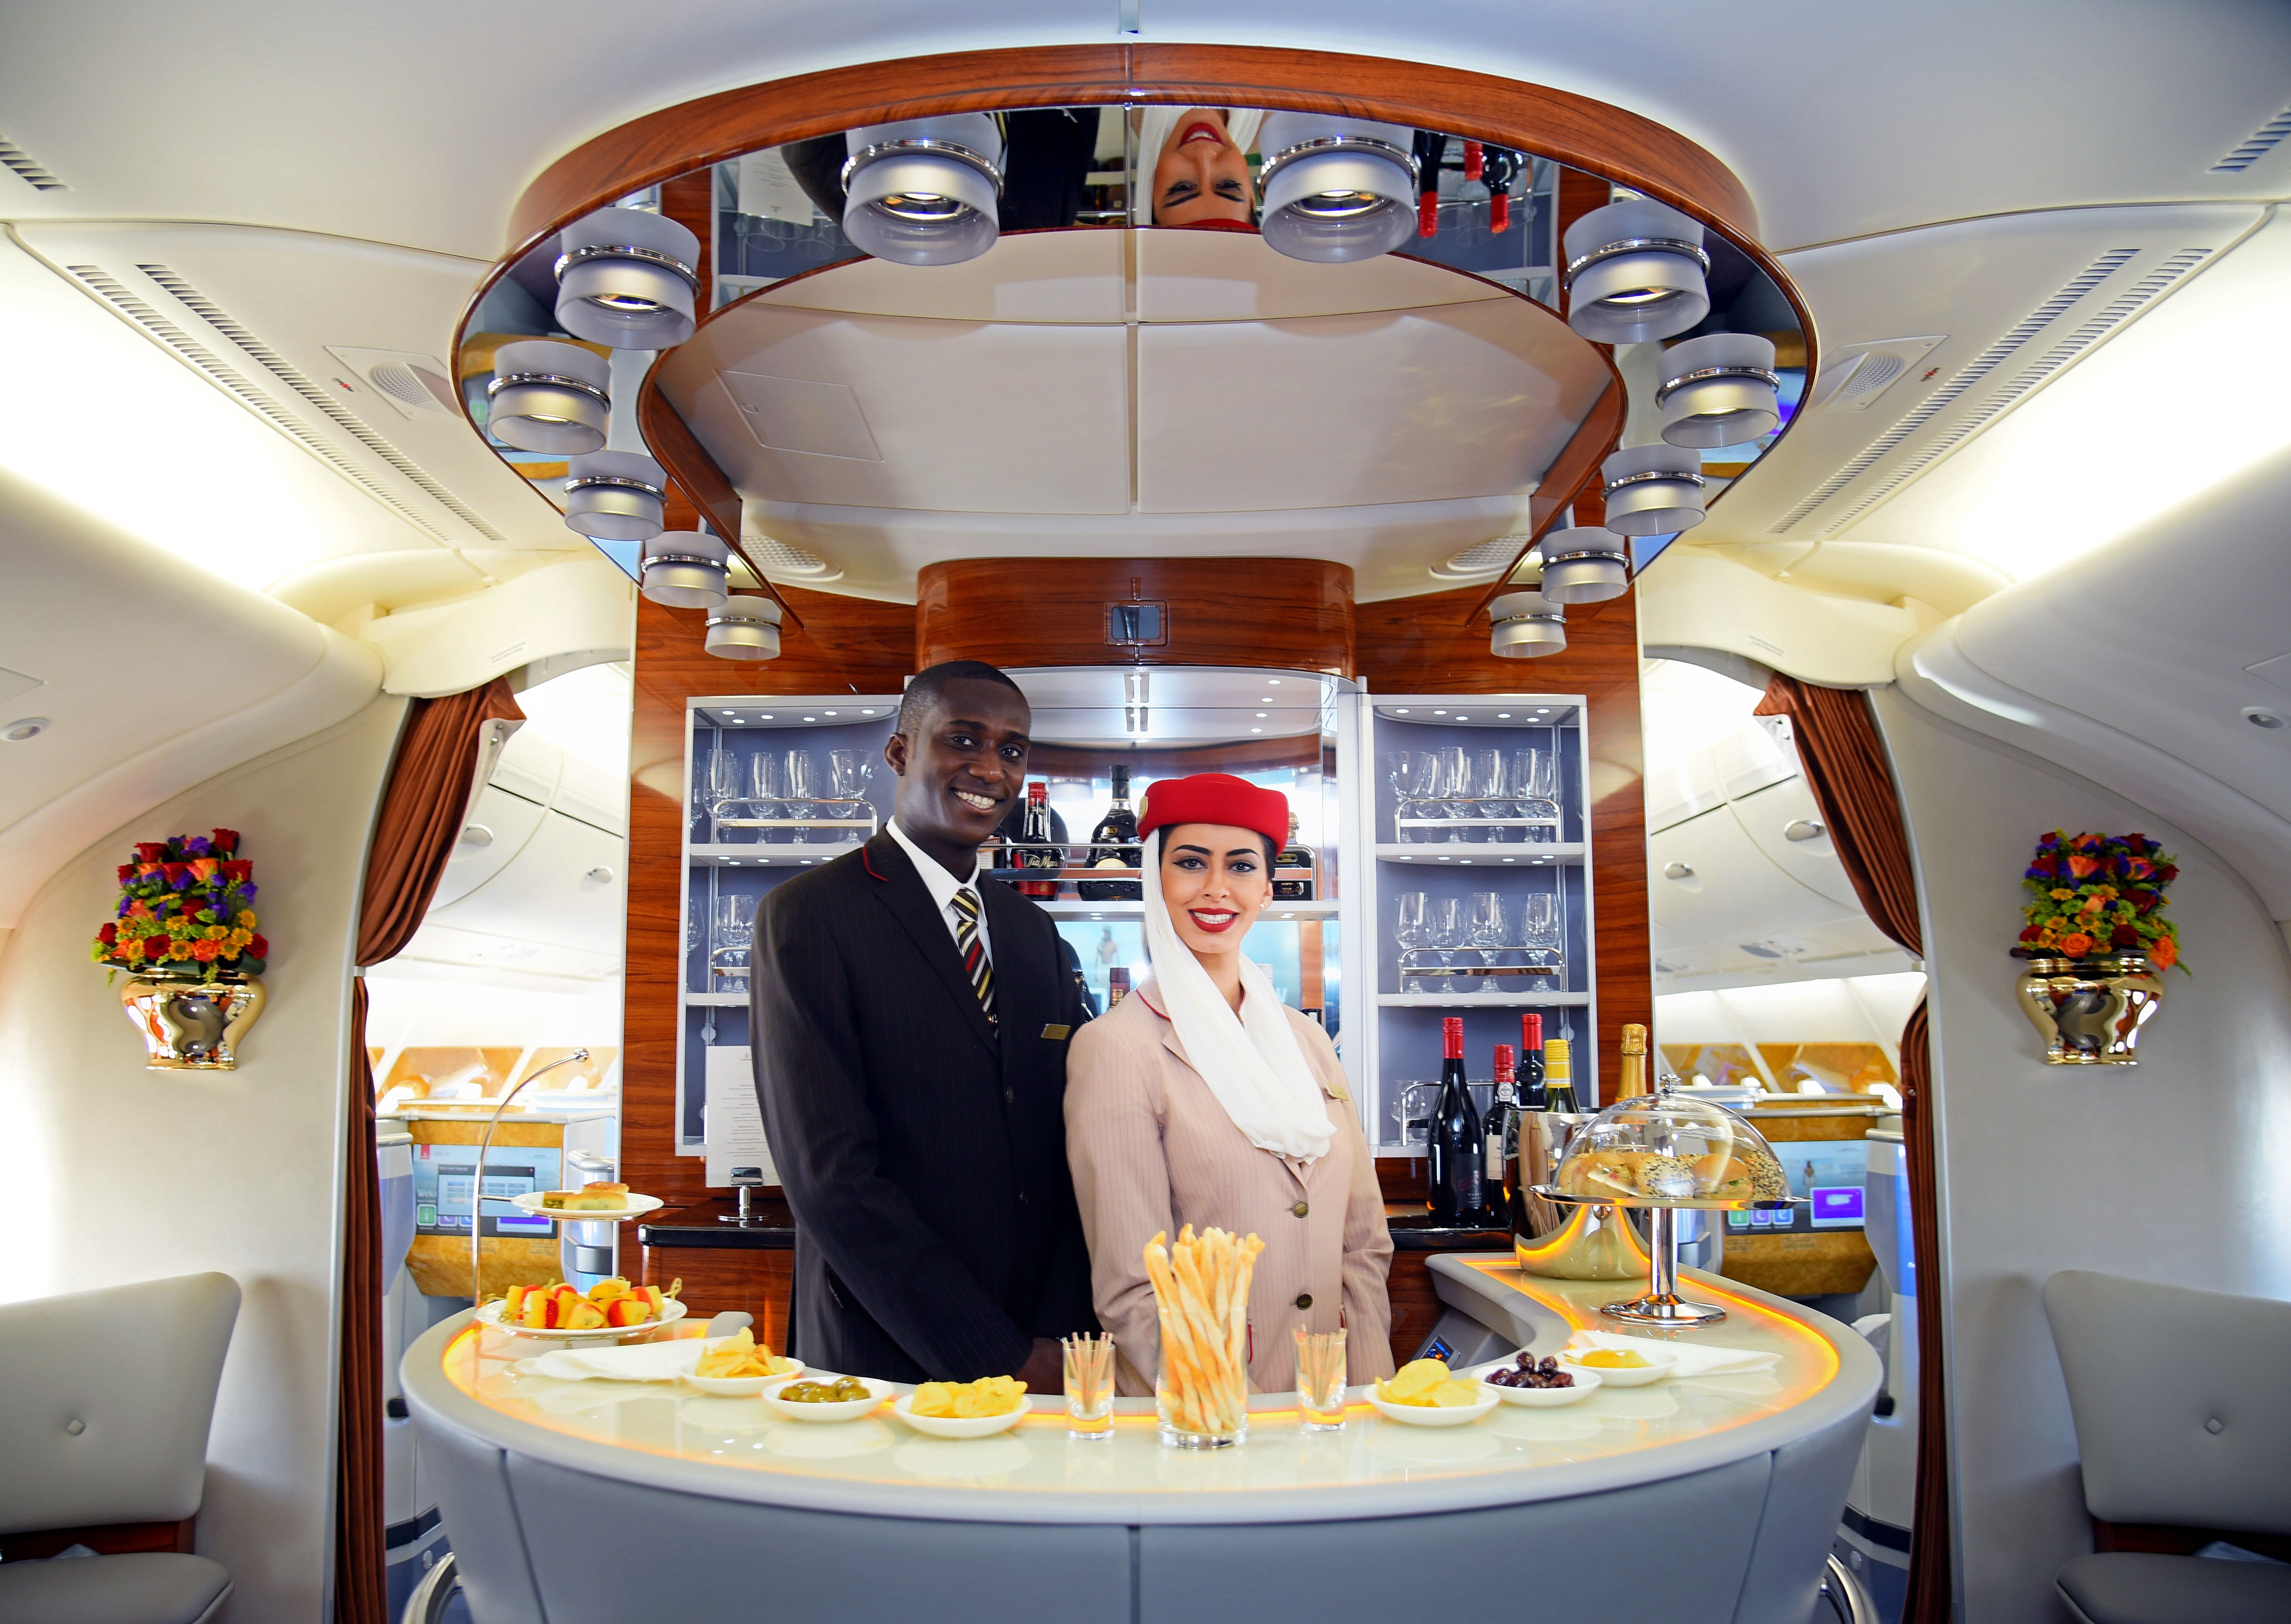 Cabin crew standing in the Emirates A380 upper deck lounge.